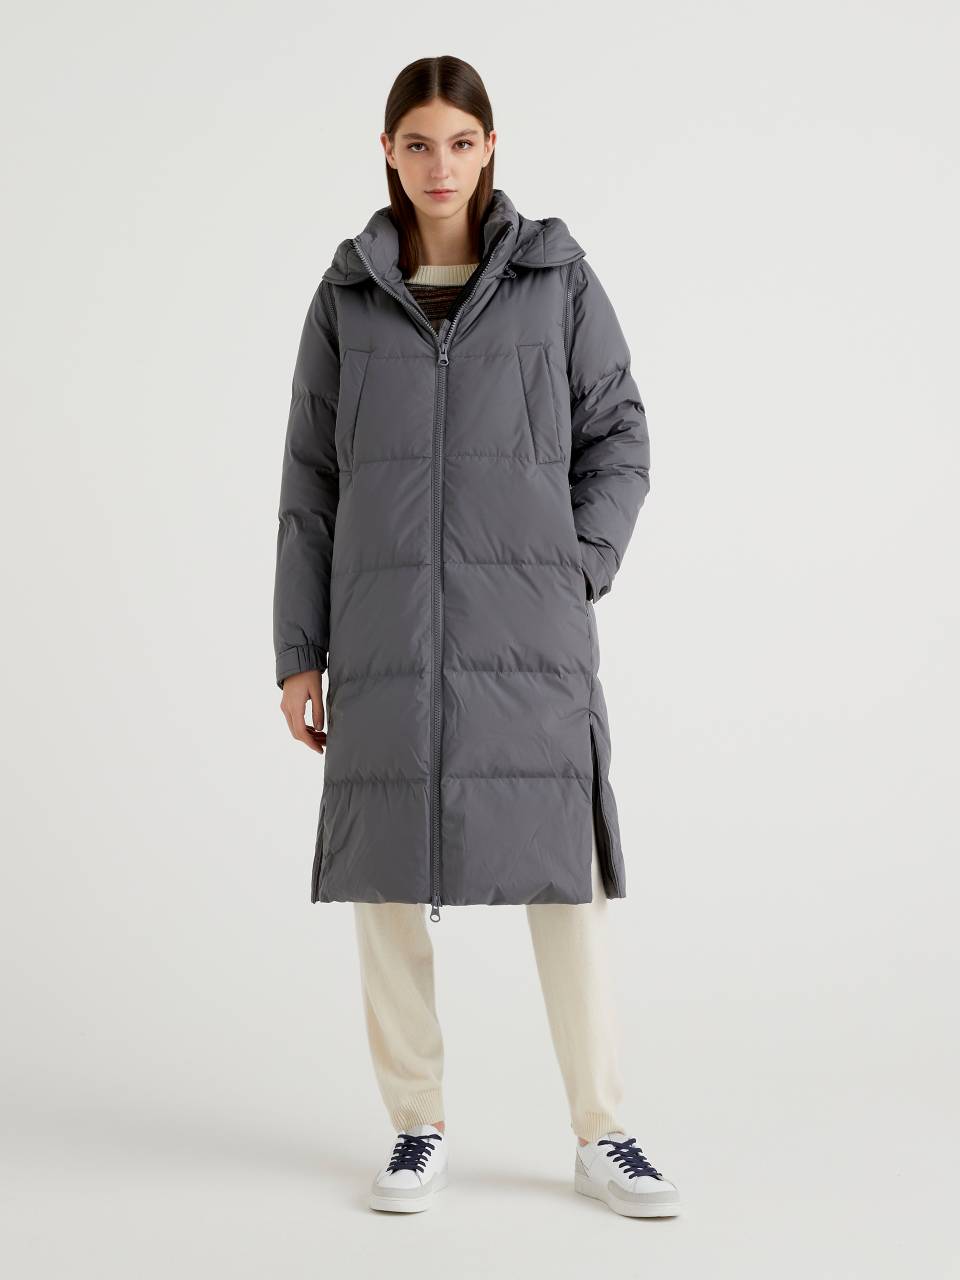 Benetton Long puffer jacket with removable sleeves. 1